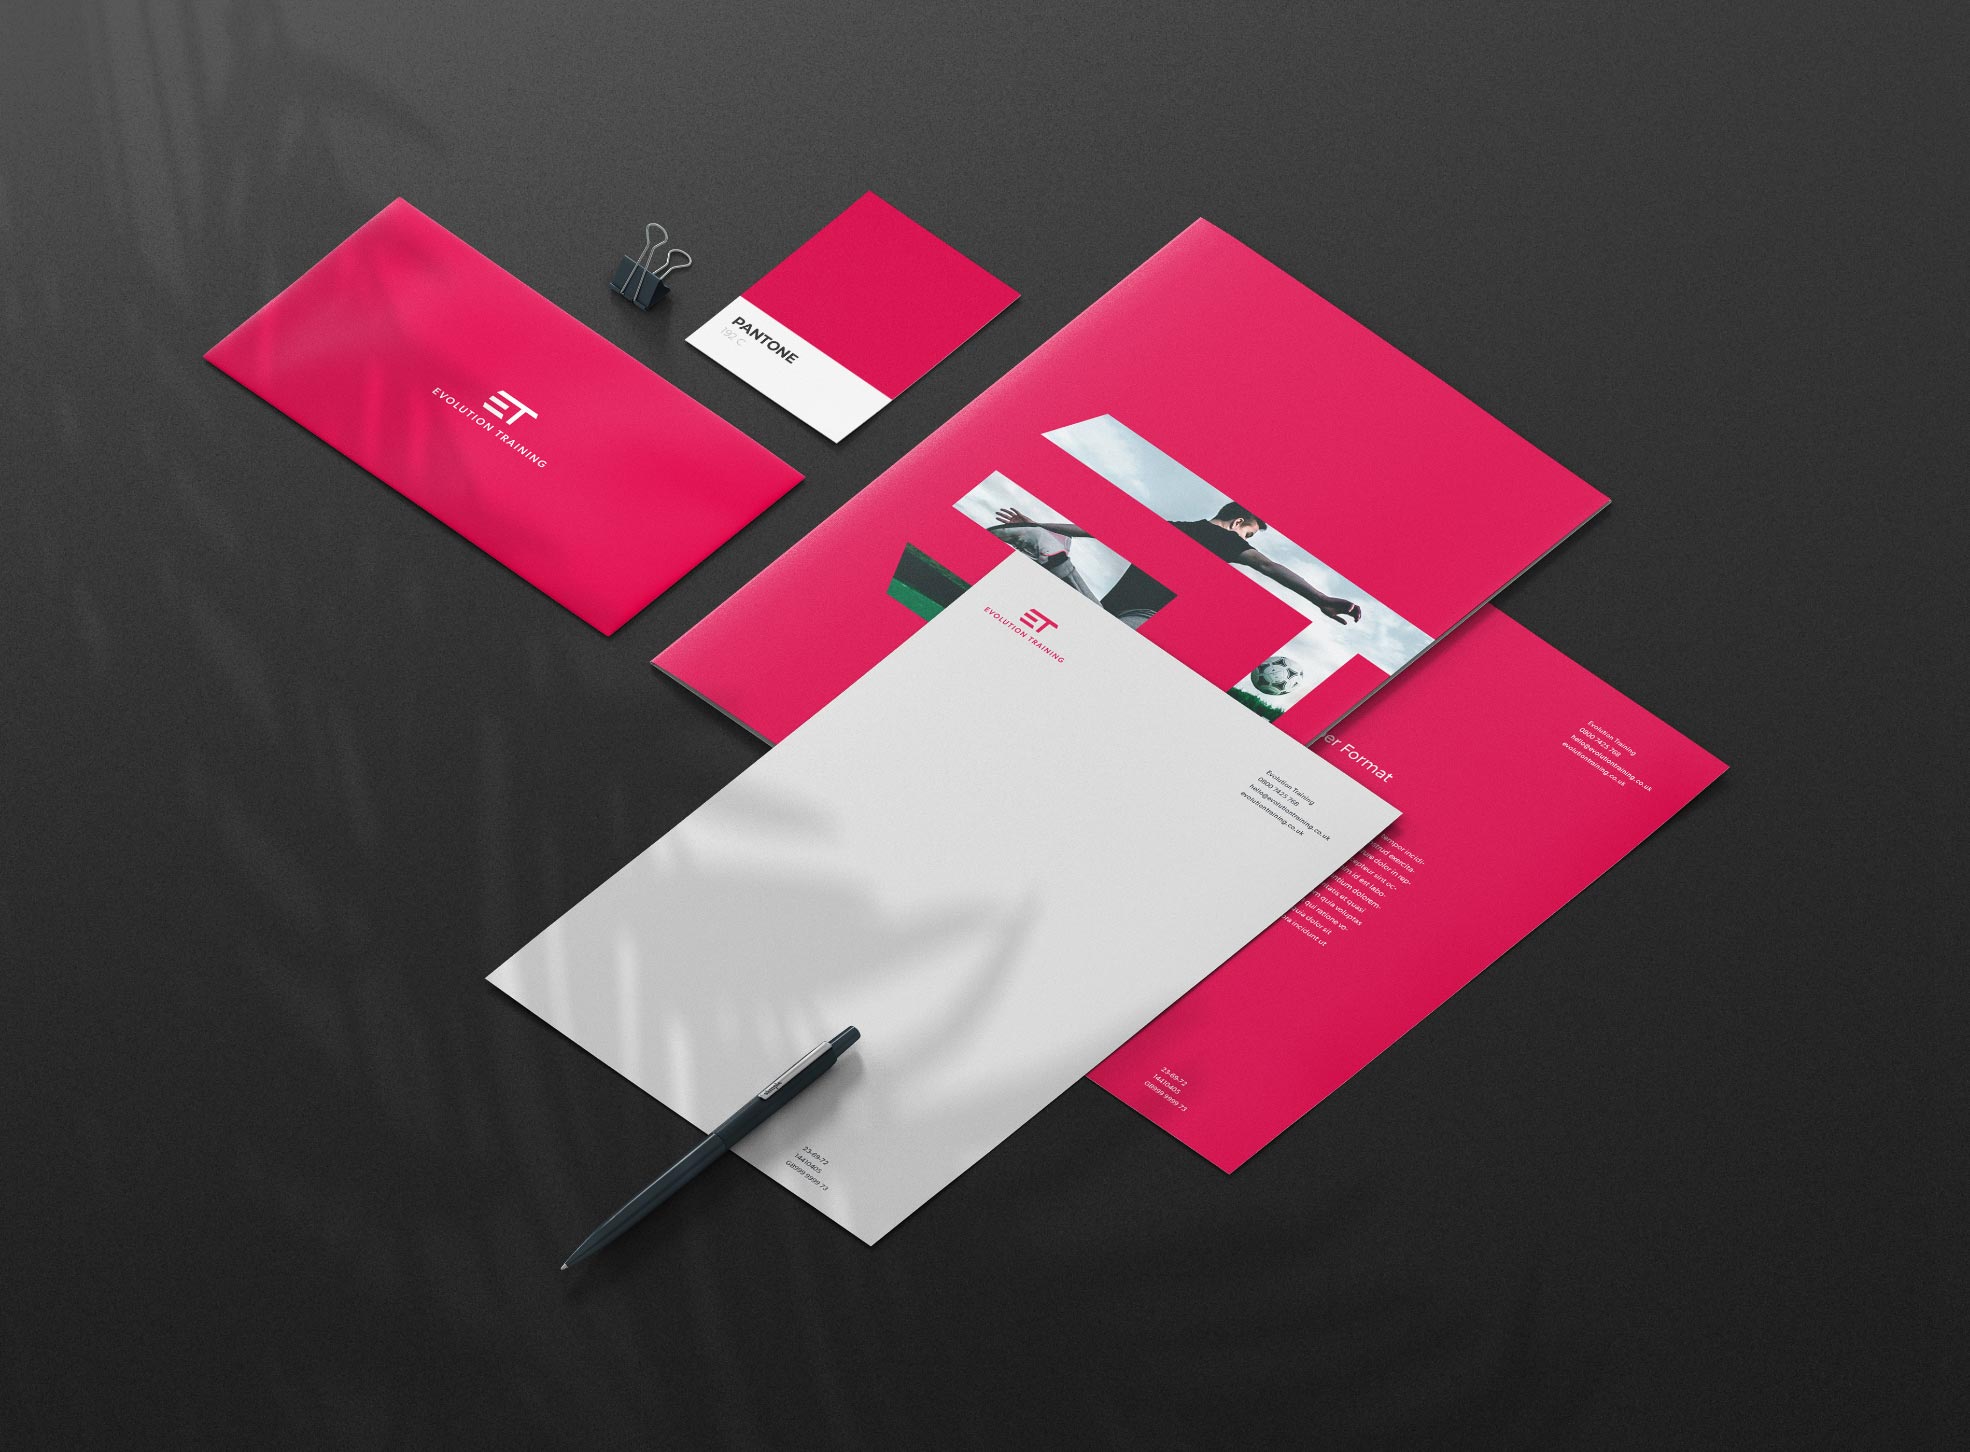 Stationery set design for sports consultancy company